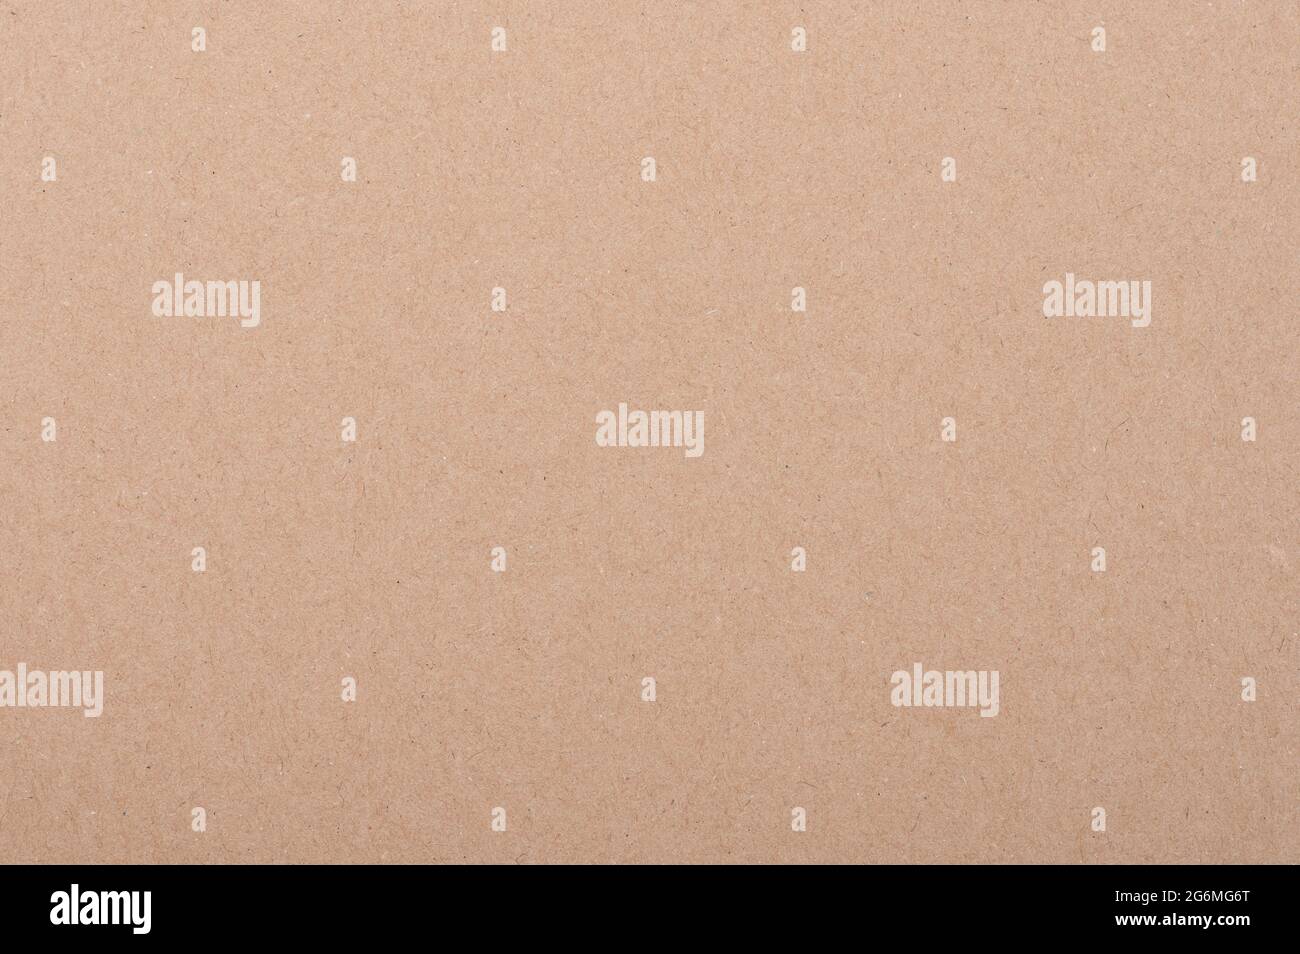 Texture of clean beige color carton paper background Stock Photo